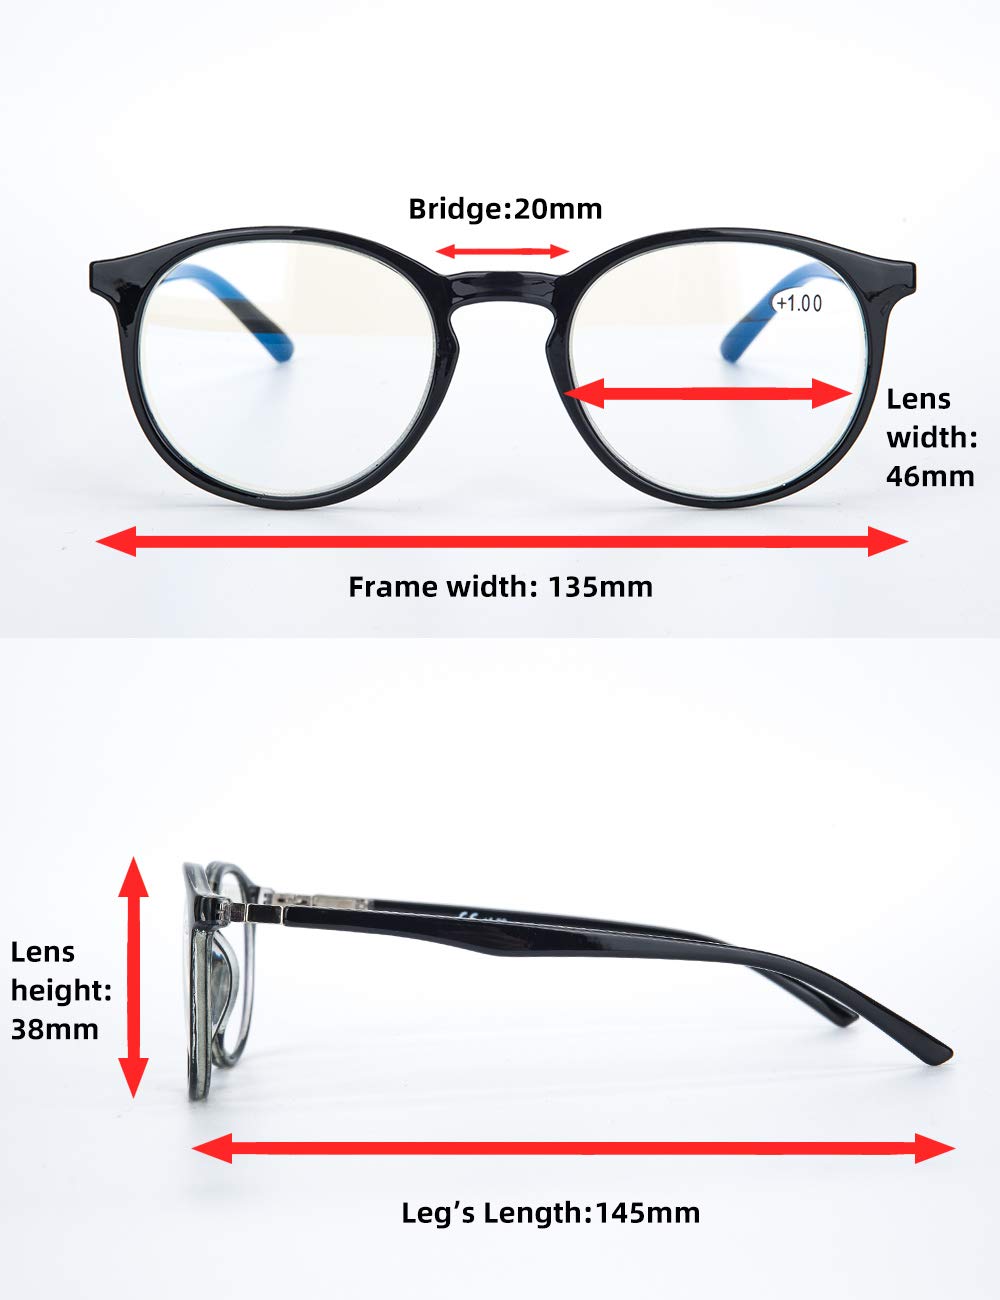 LANLANG 3-Pack Blue Light Blocking Reading Glasse for Women with round frame Anti Eyestrain 3 Colors L-L006